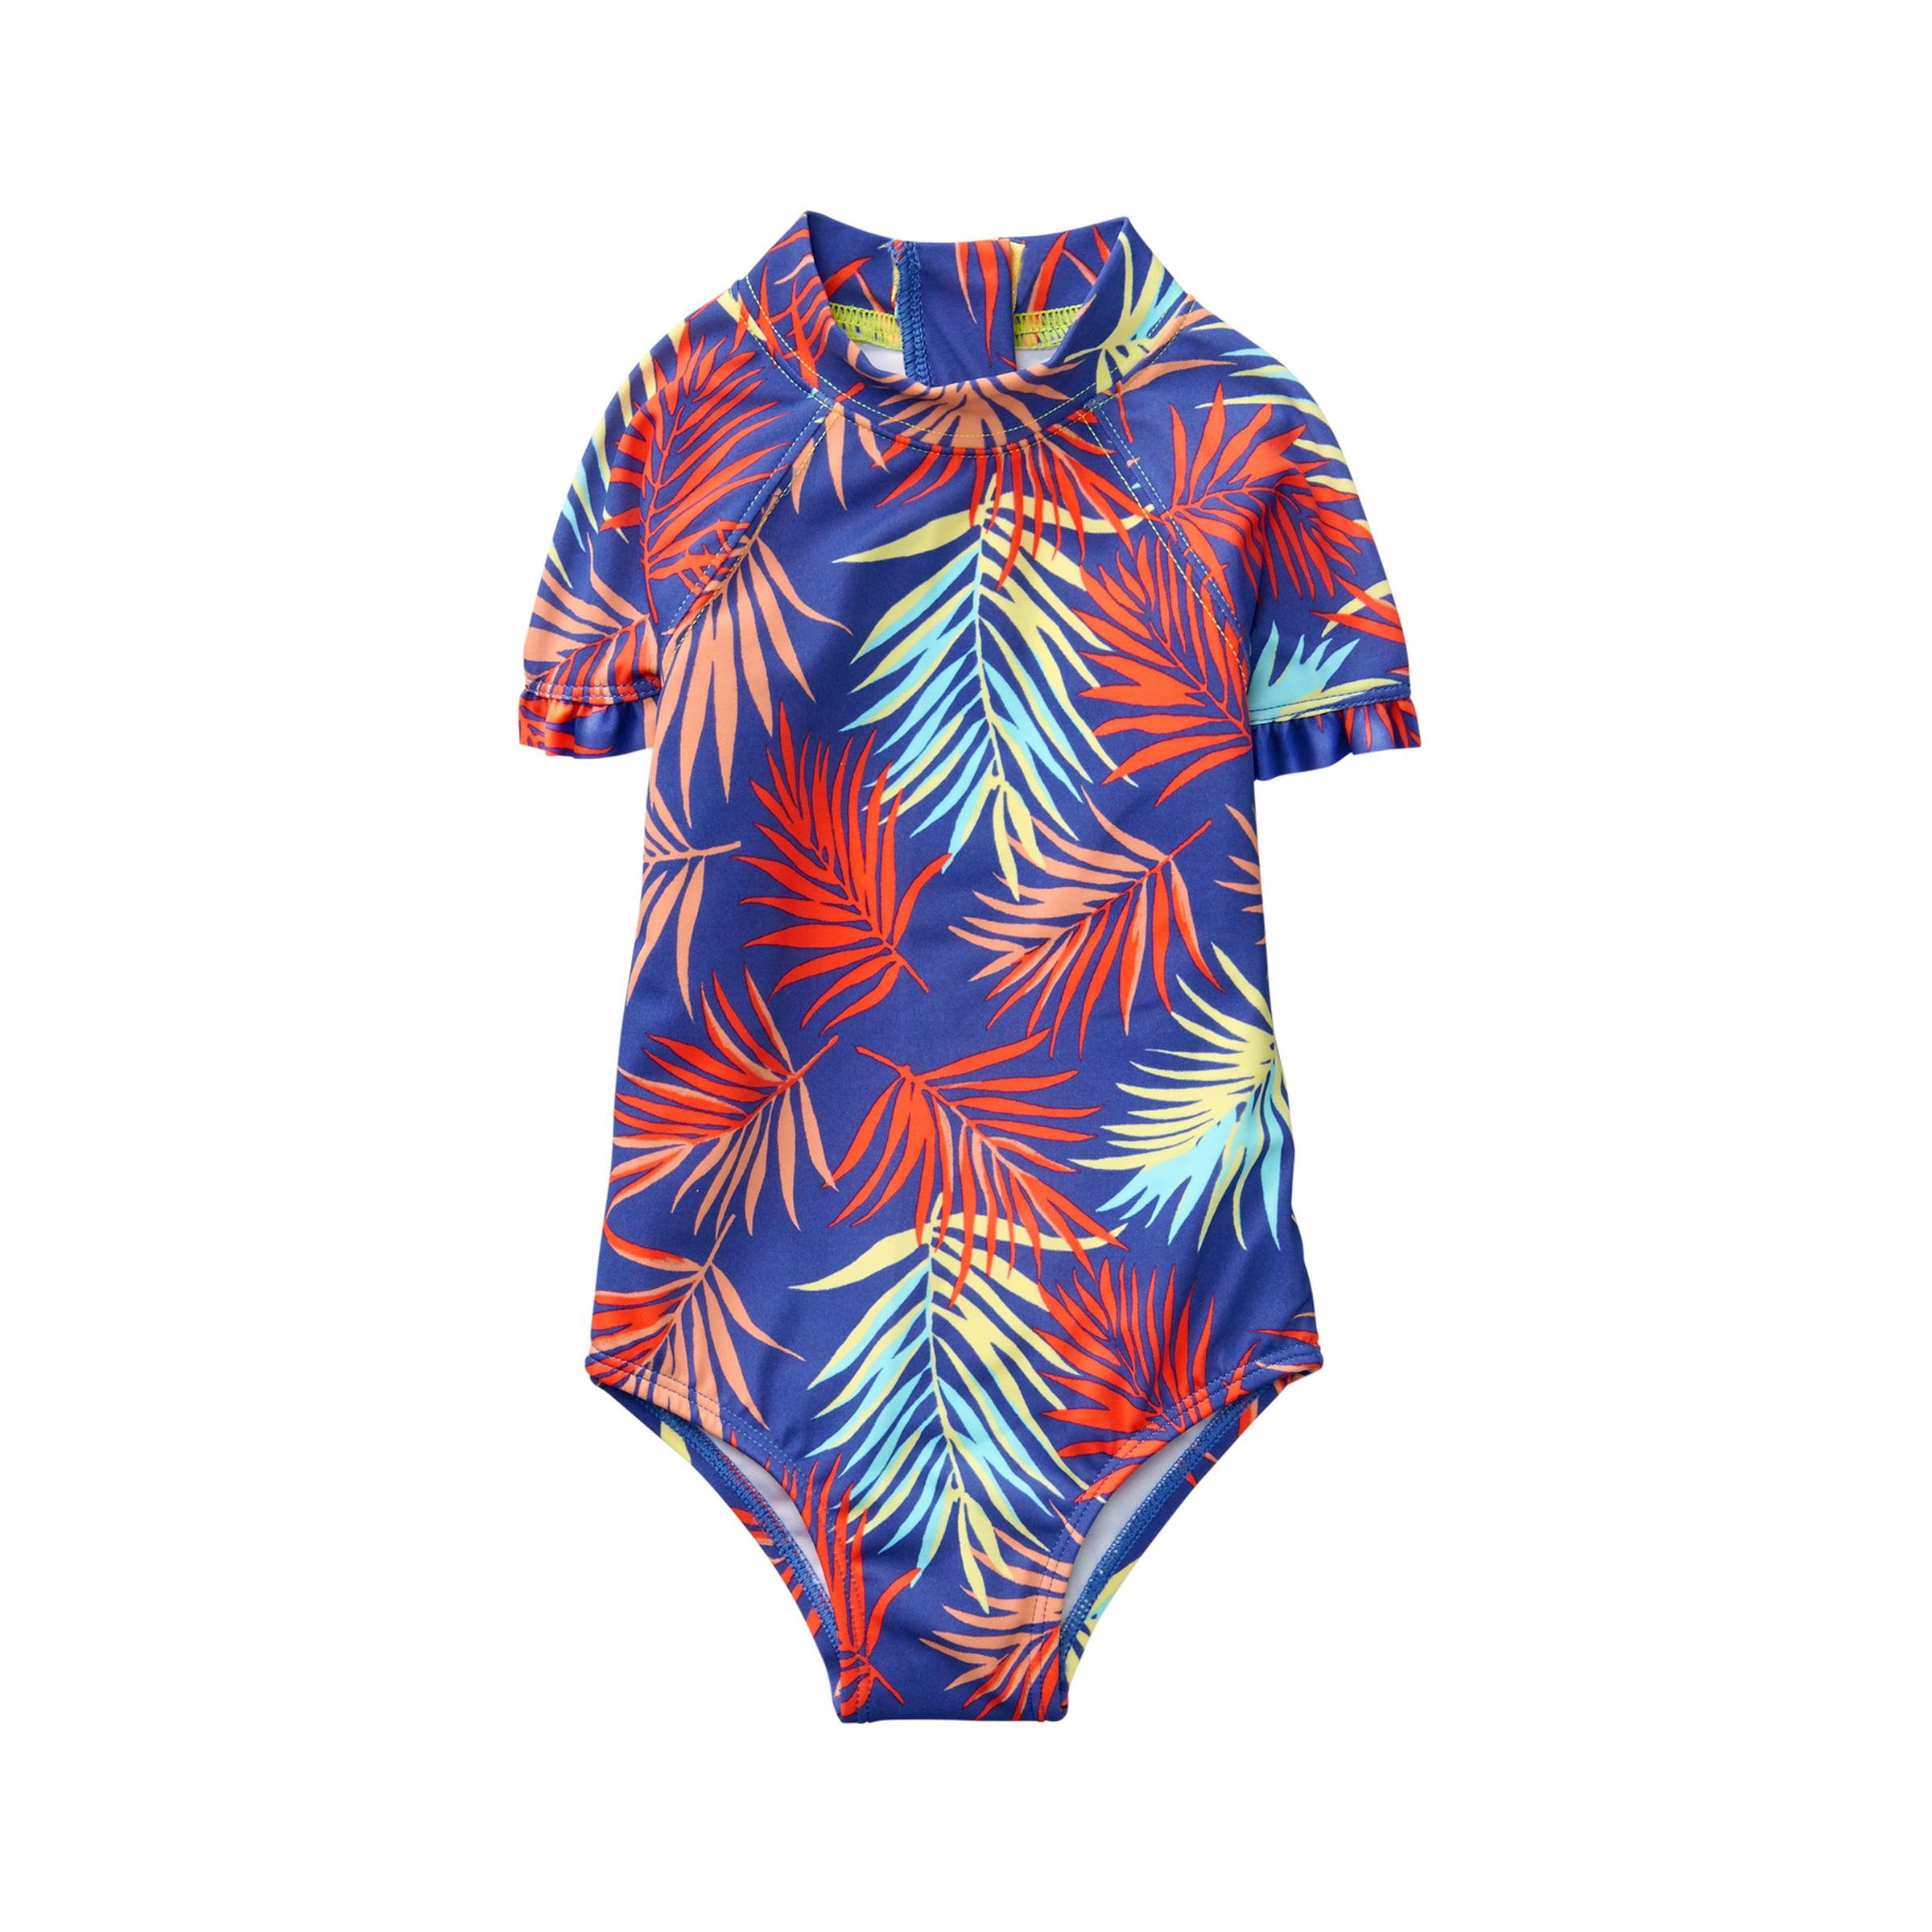 Cute Baby Girl Swimsuits: The Best Options for this Years Summer fun